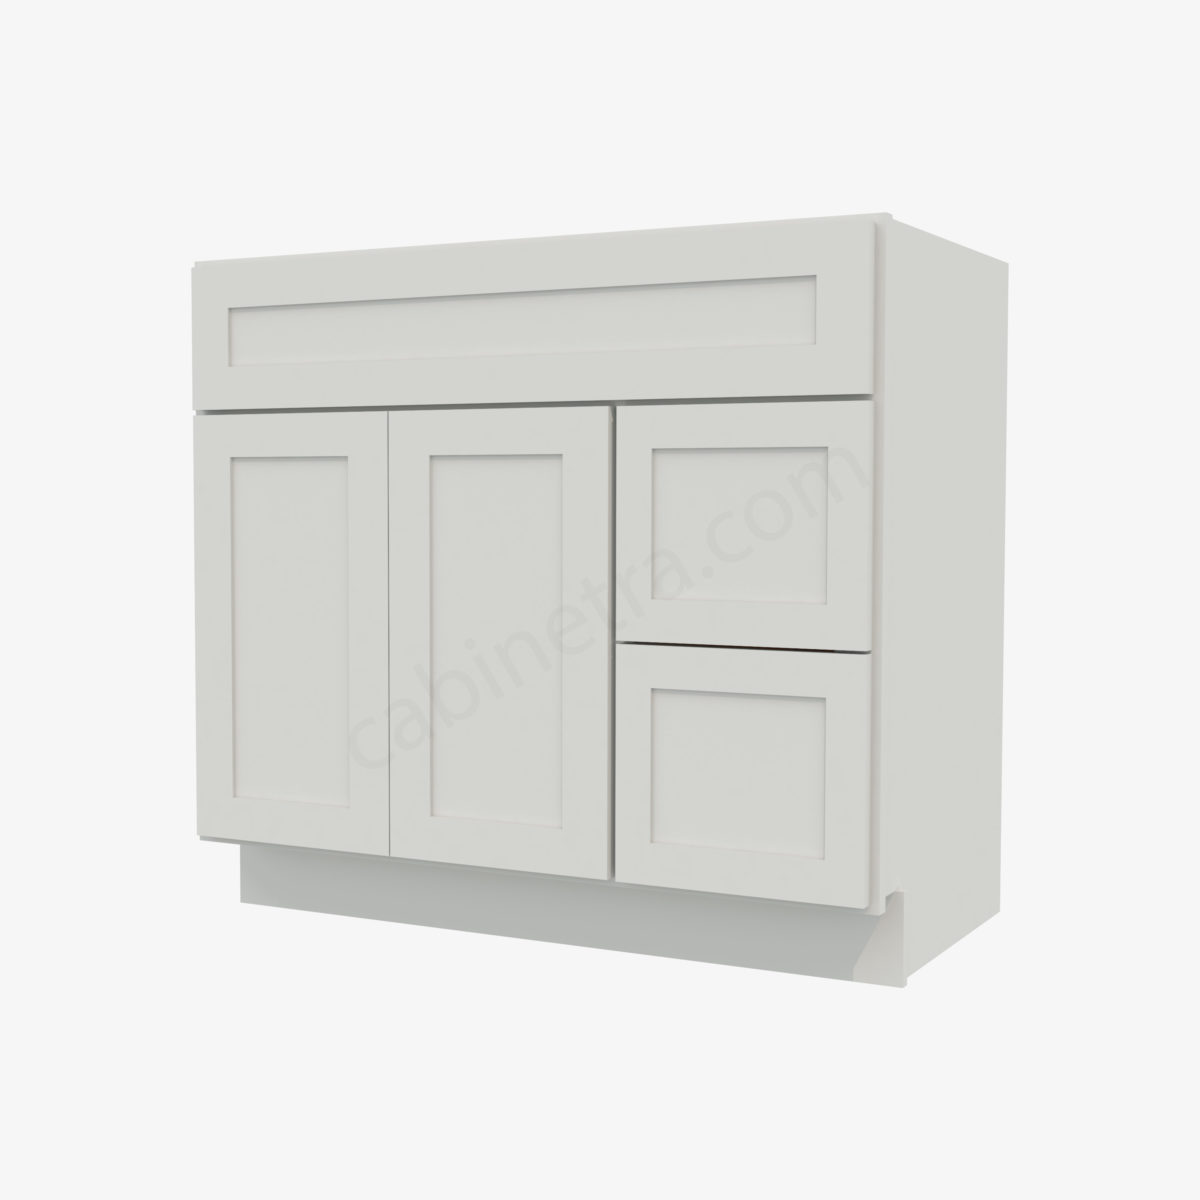 AW S3621BDR 34 0 Forevermark Ice White Shaker Cabinetra scaled